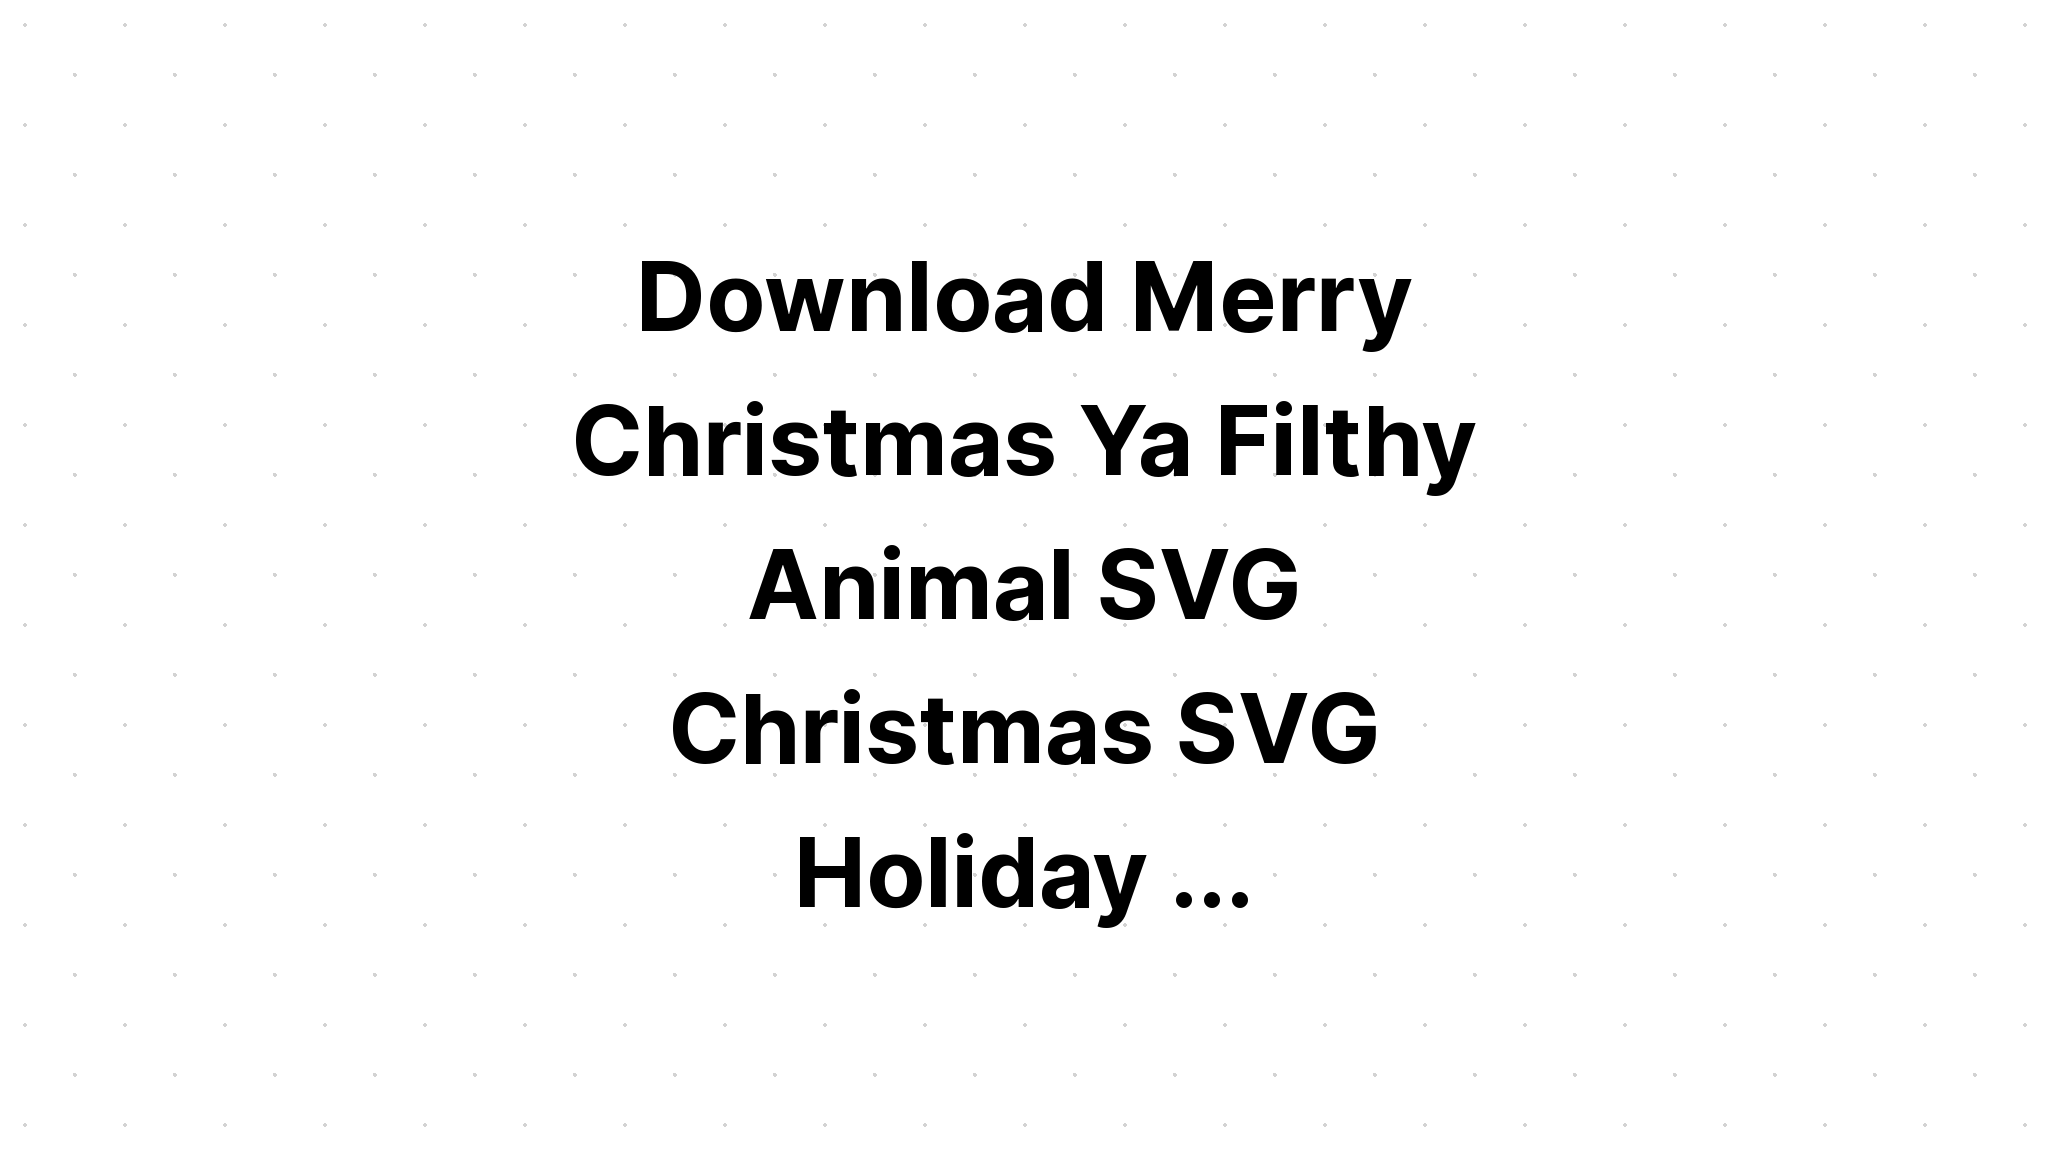 Download Merry Christmas You Filthy Animal Xmas SVG File